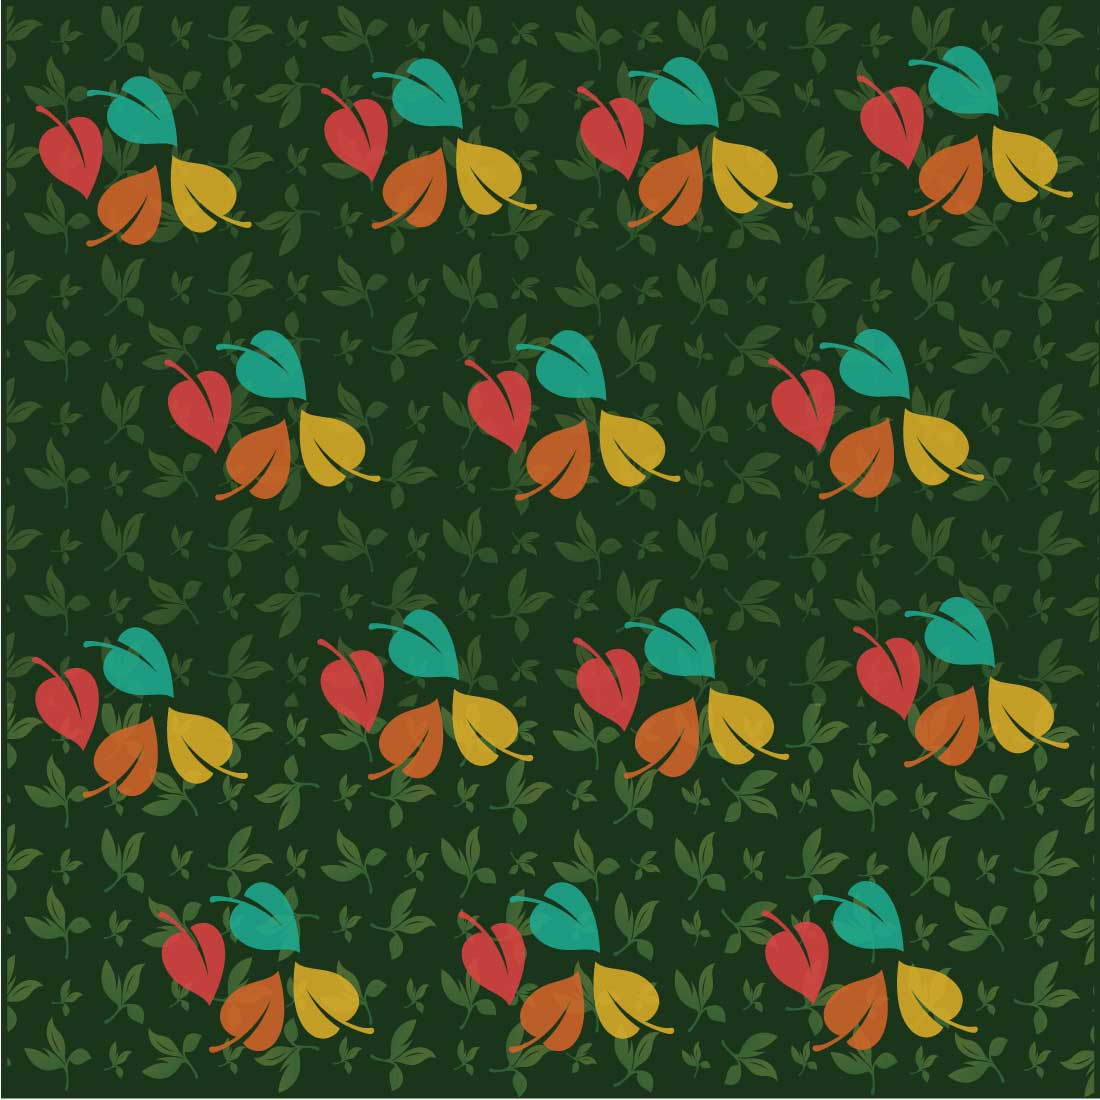 Autumn leaves pattern, and background for print on fabric, surface, paper, wrapping cover image.